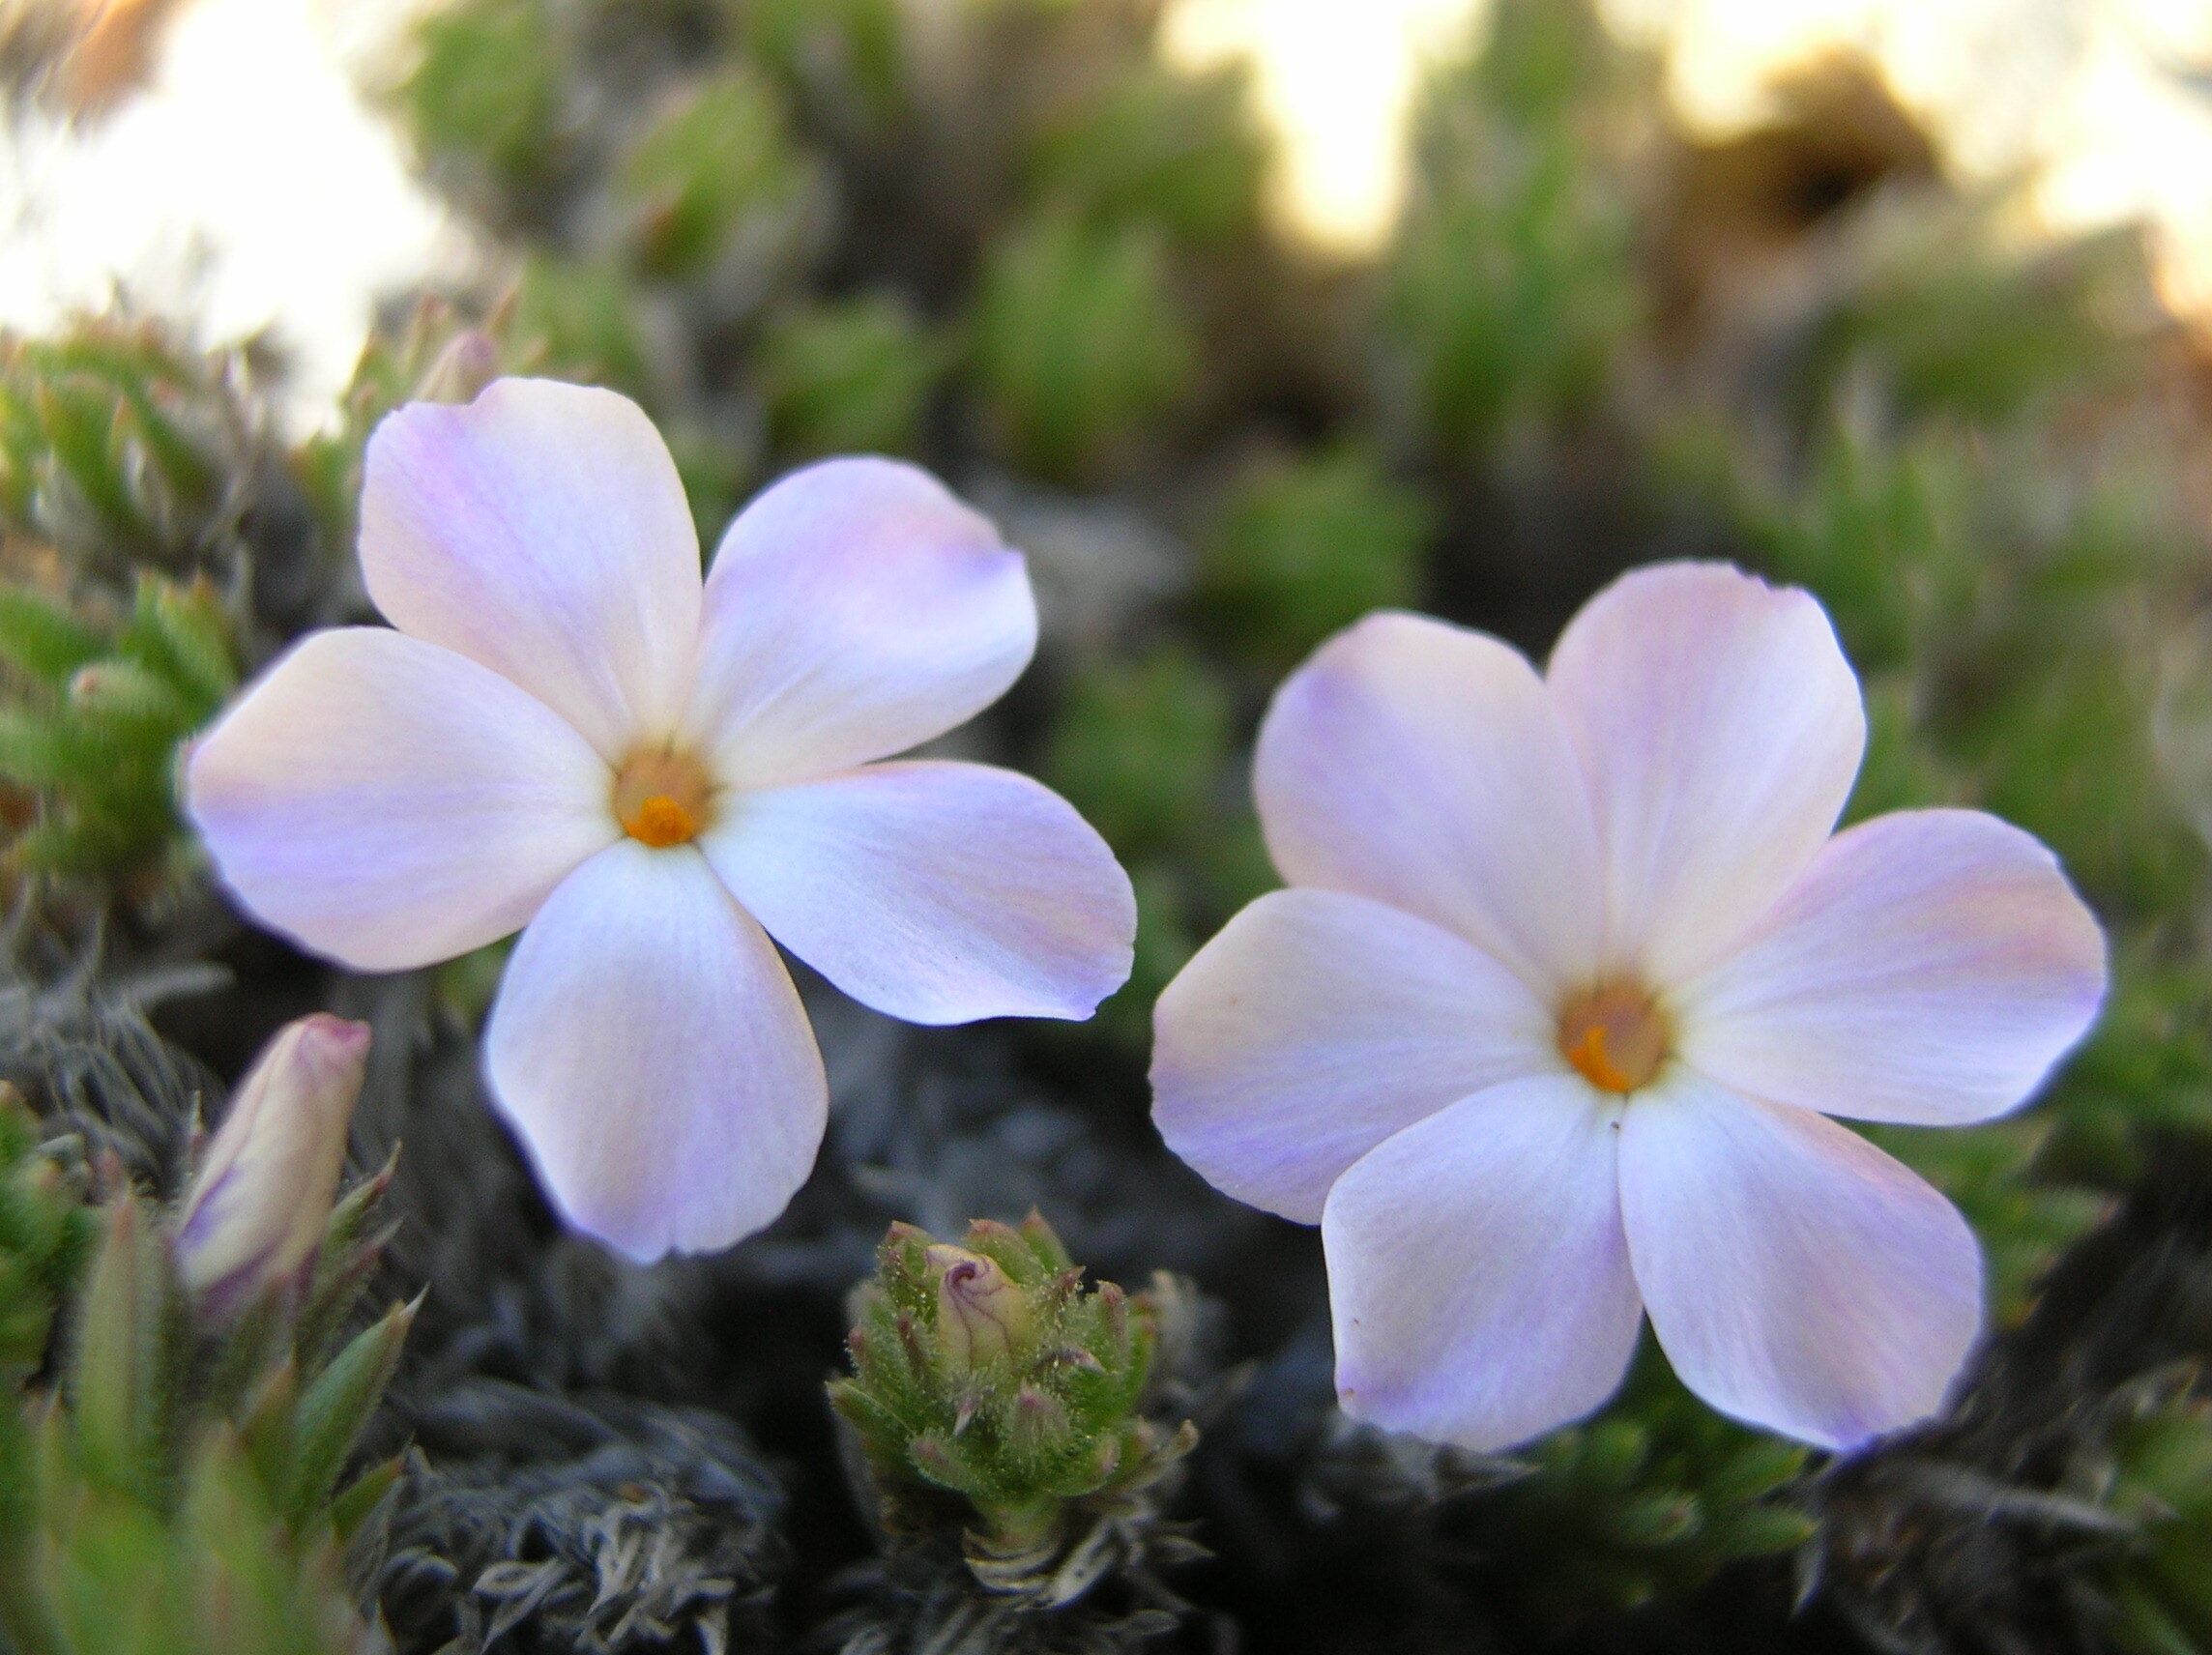 Large-petaled pinkish-white flowers grow low to the ground.